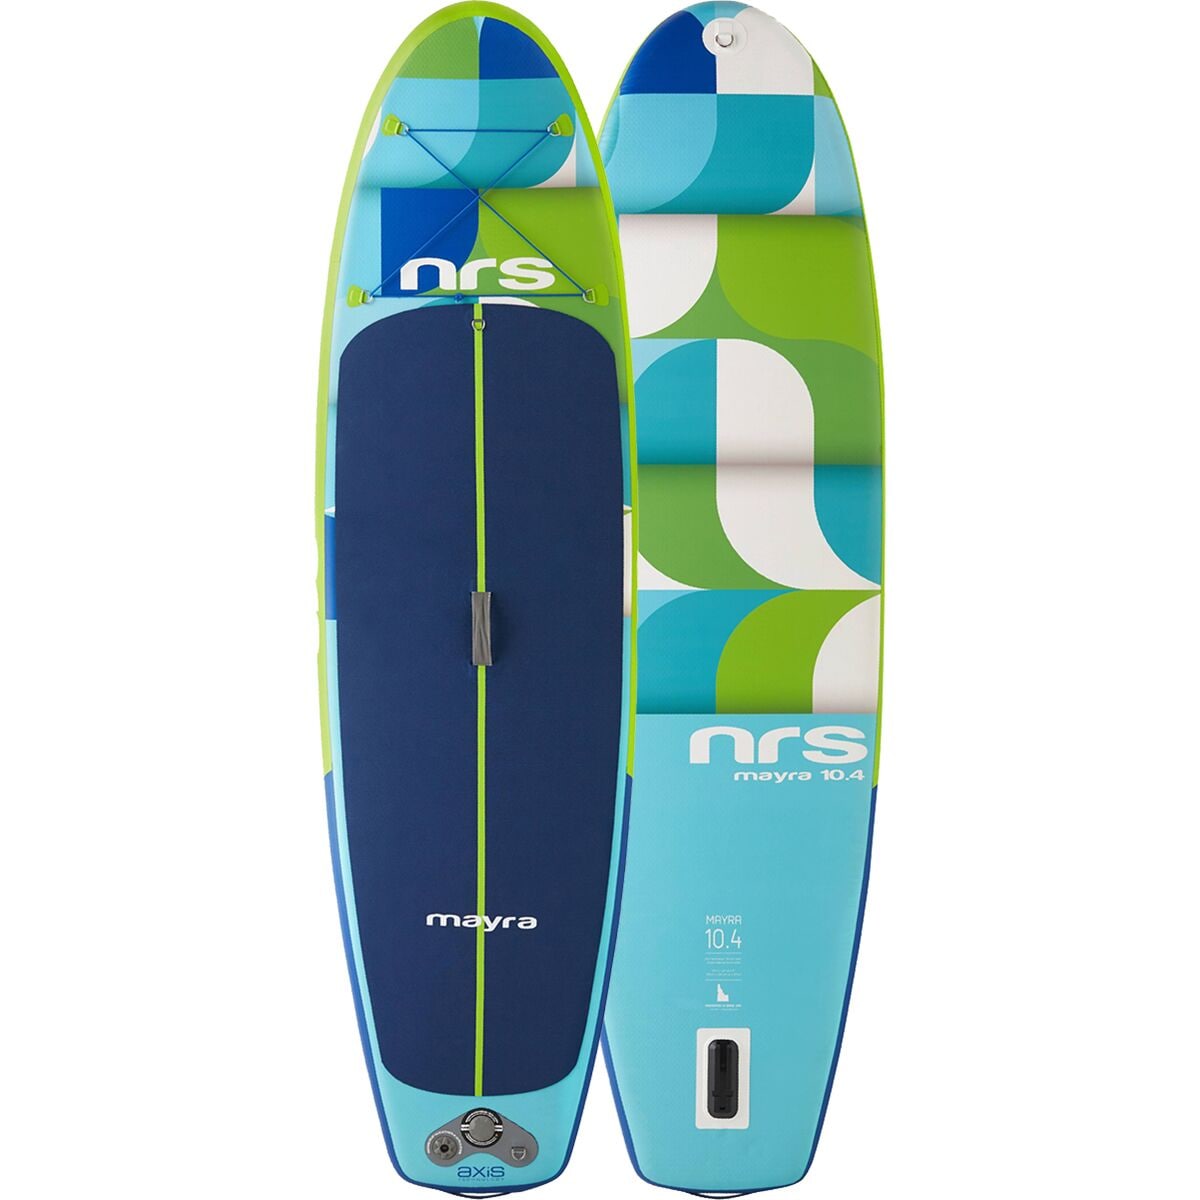 NRS Mayra Inflatable Stand-Up Paddleboard - Women's